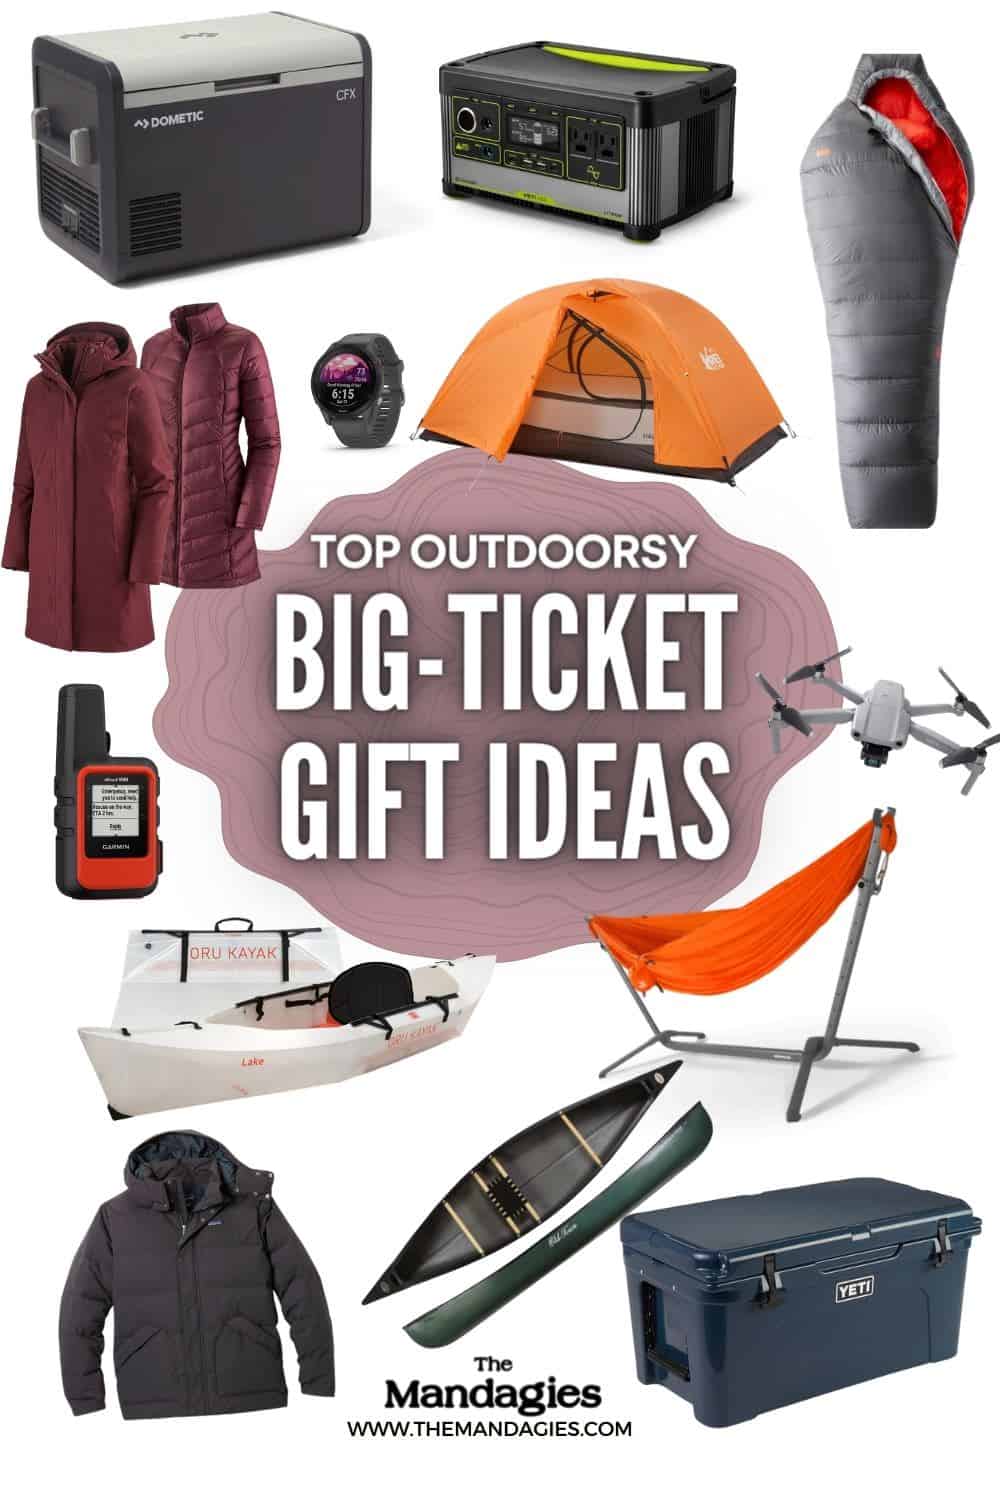 Outdoor Gifts for splurge-worthy presernts